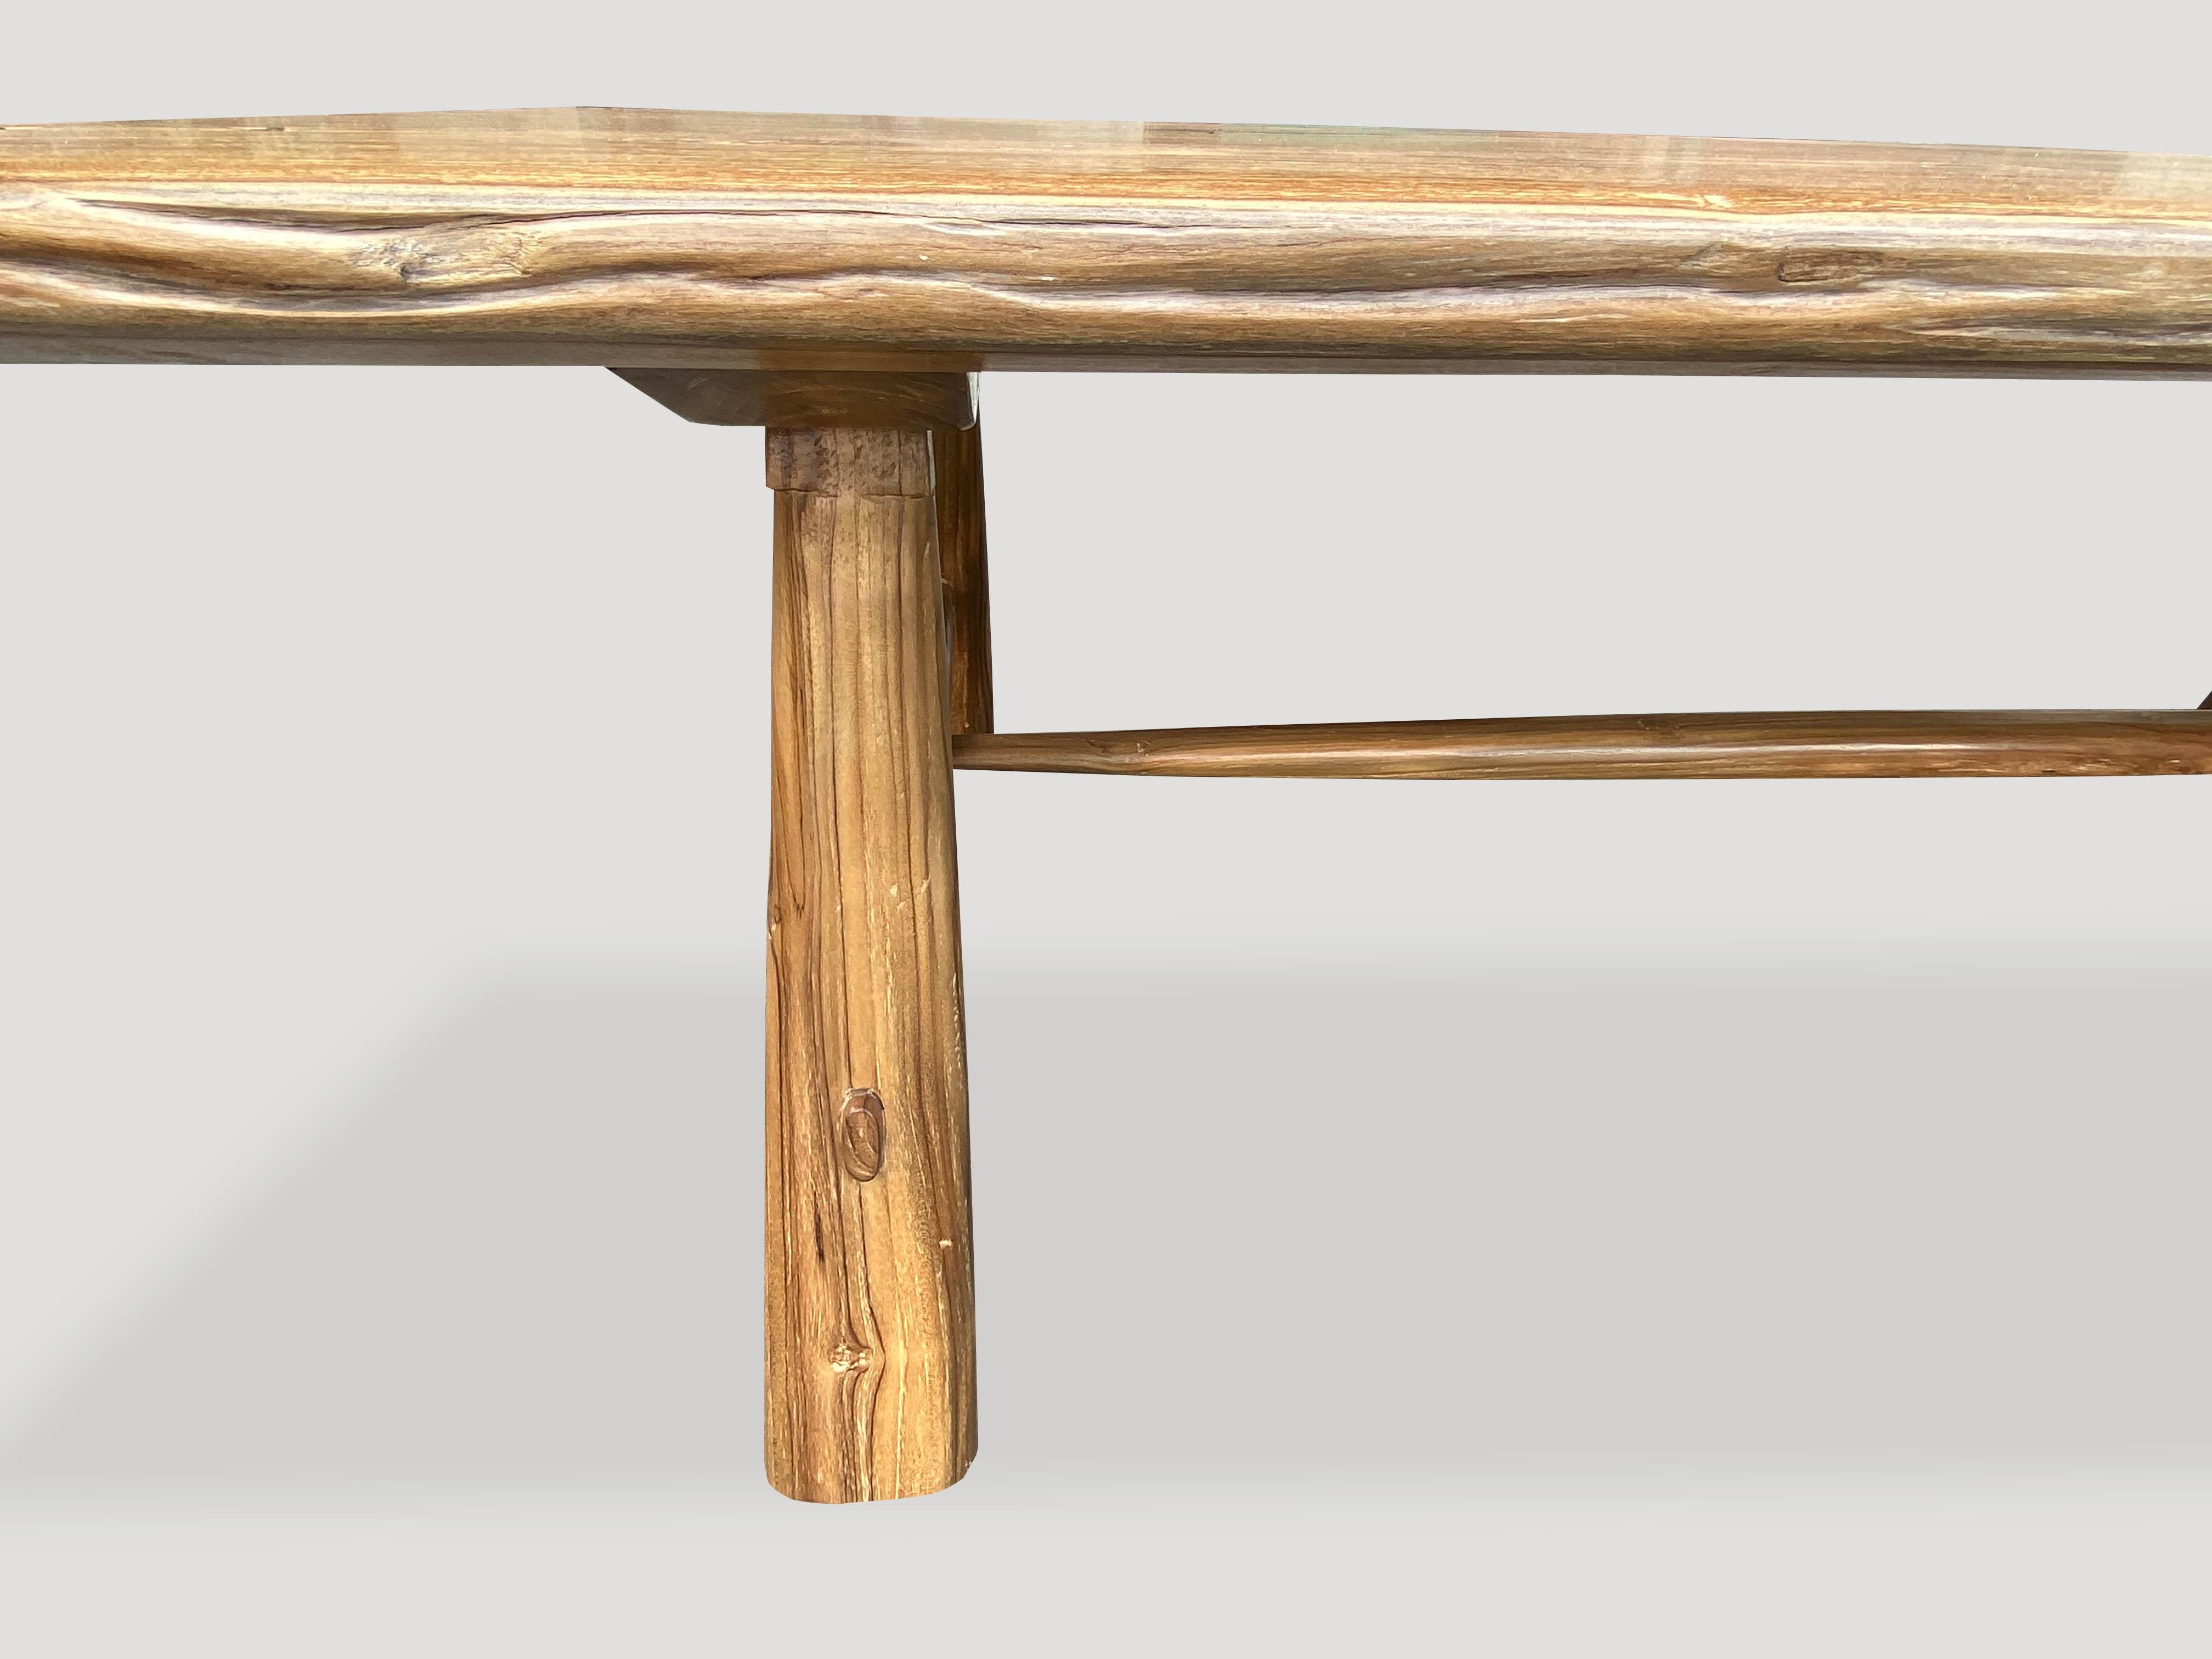 Andrianna Shamaris Midcentury Couture Teak Wood Dining Table For Sale 3